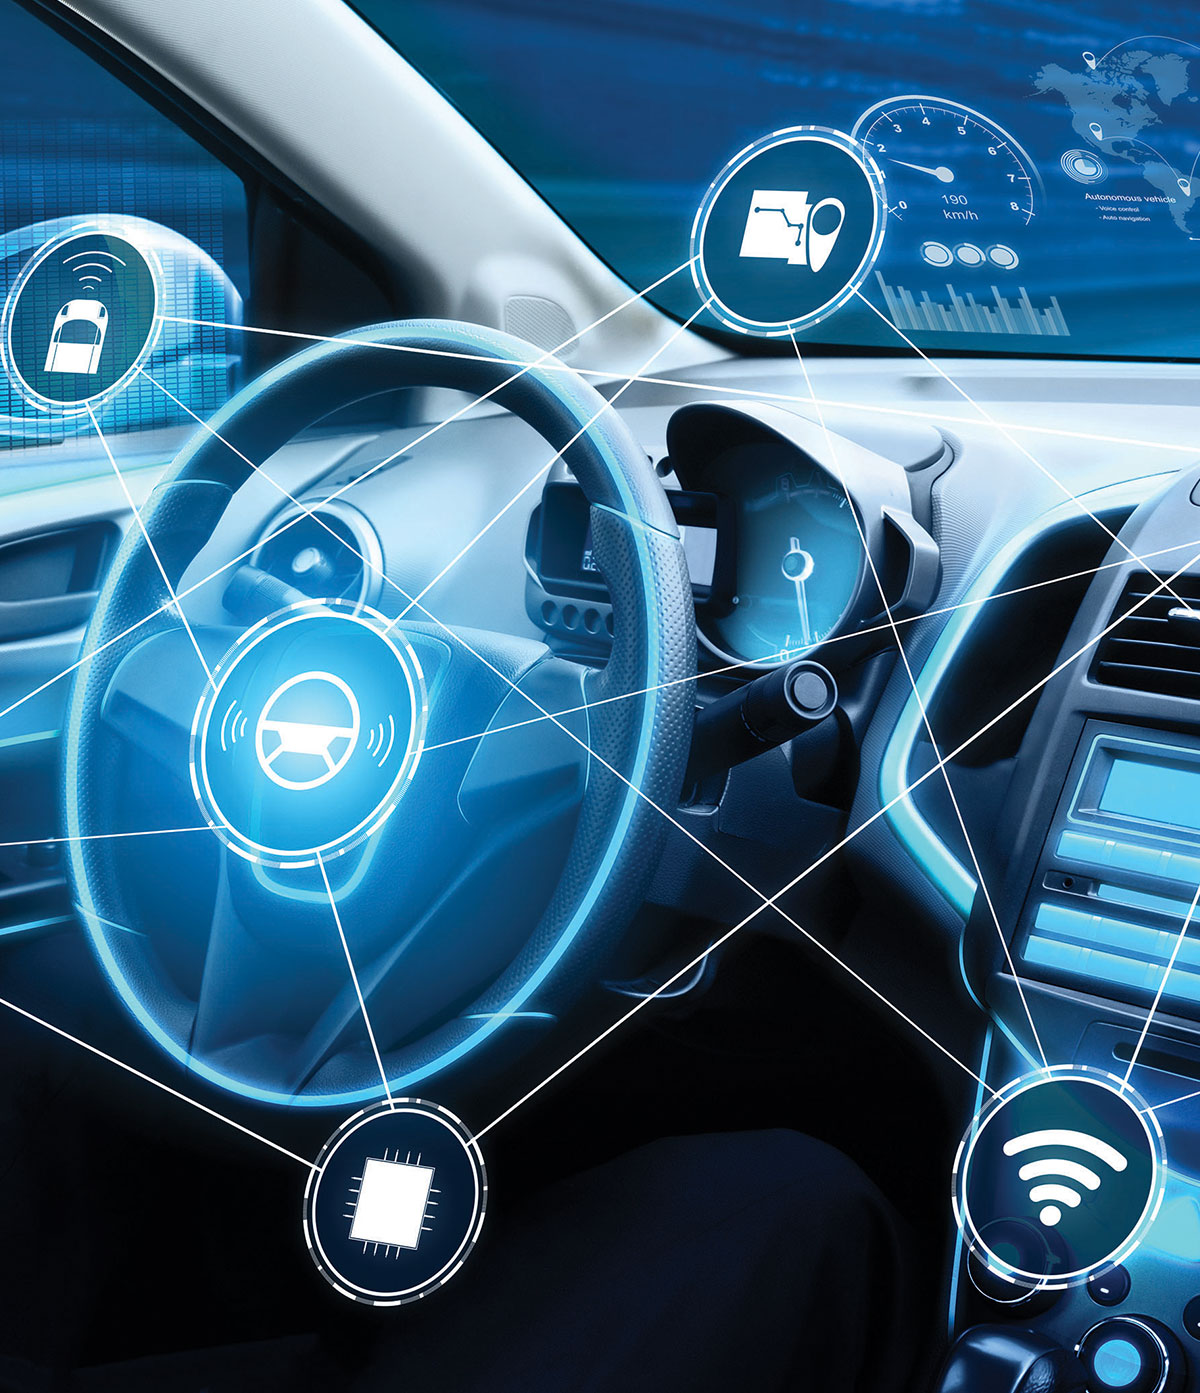 Assessing Advanced Driver Assistance Systems (ADAS) in Vehicles